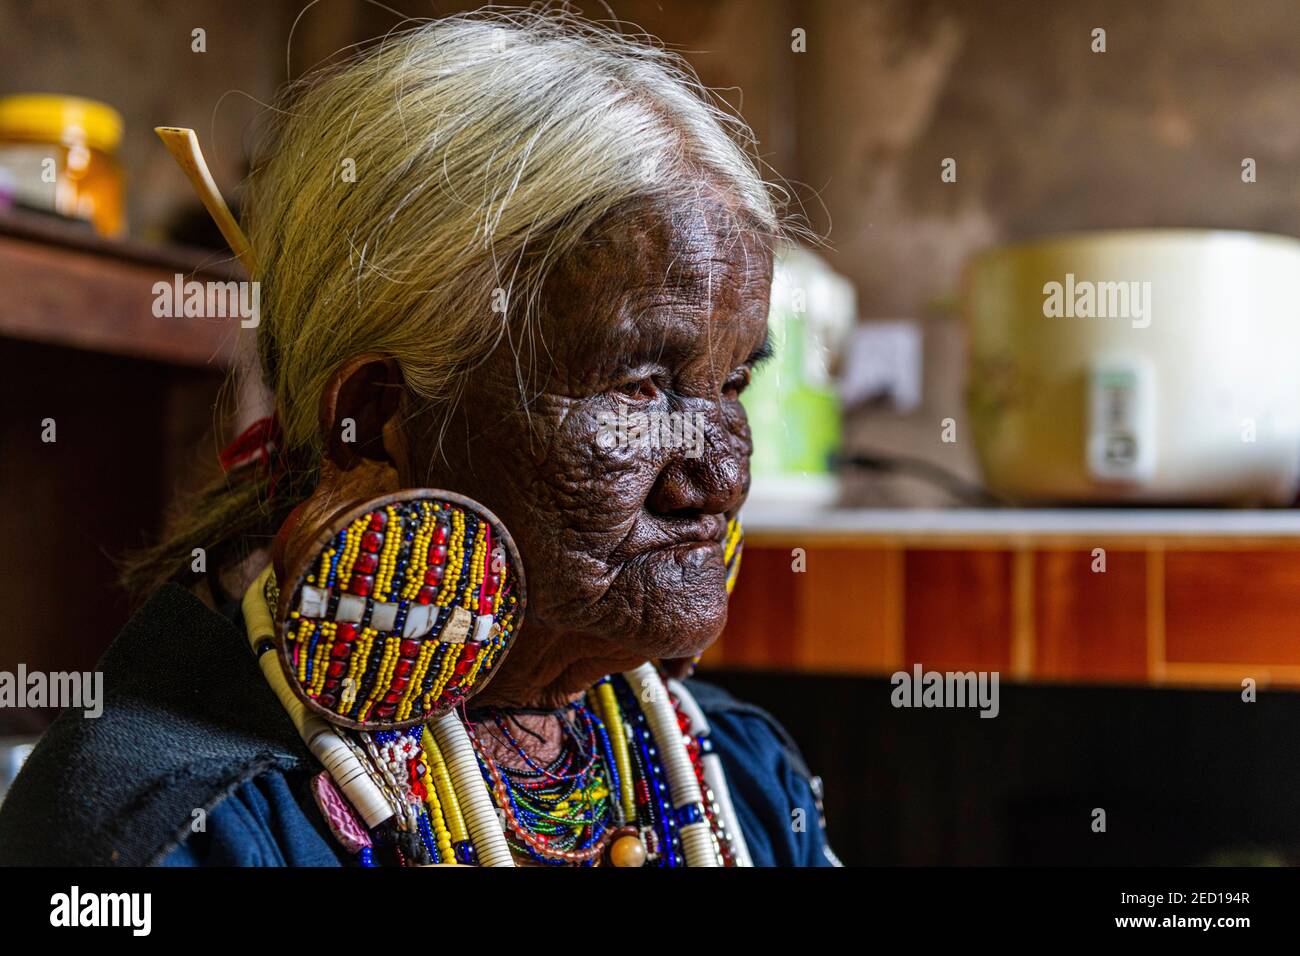 Chin Kaang hill-tribe woman with traditional facial tattoo and elaborate tribal earrings playing a flute with her nose, Mindat, Chin state, Myanmar Stock Photo